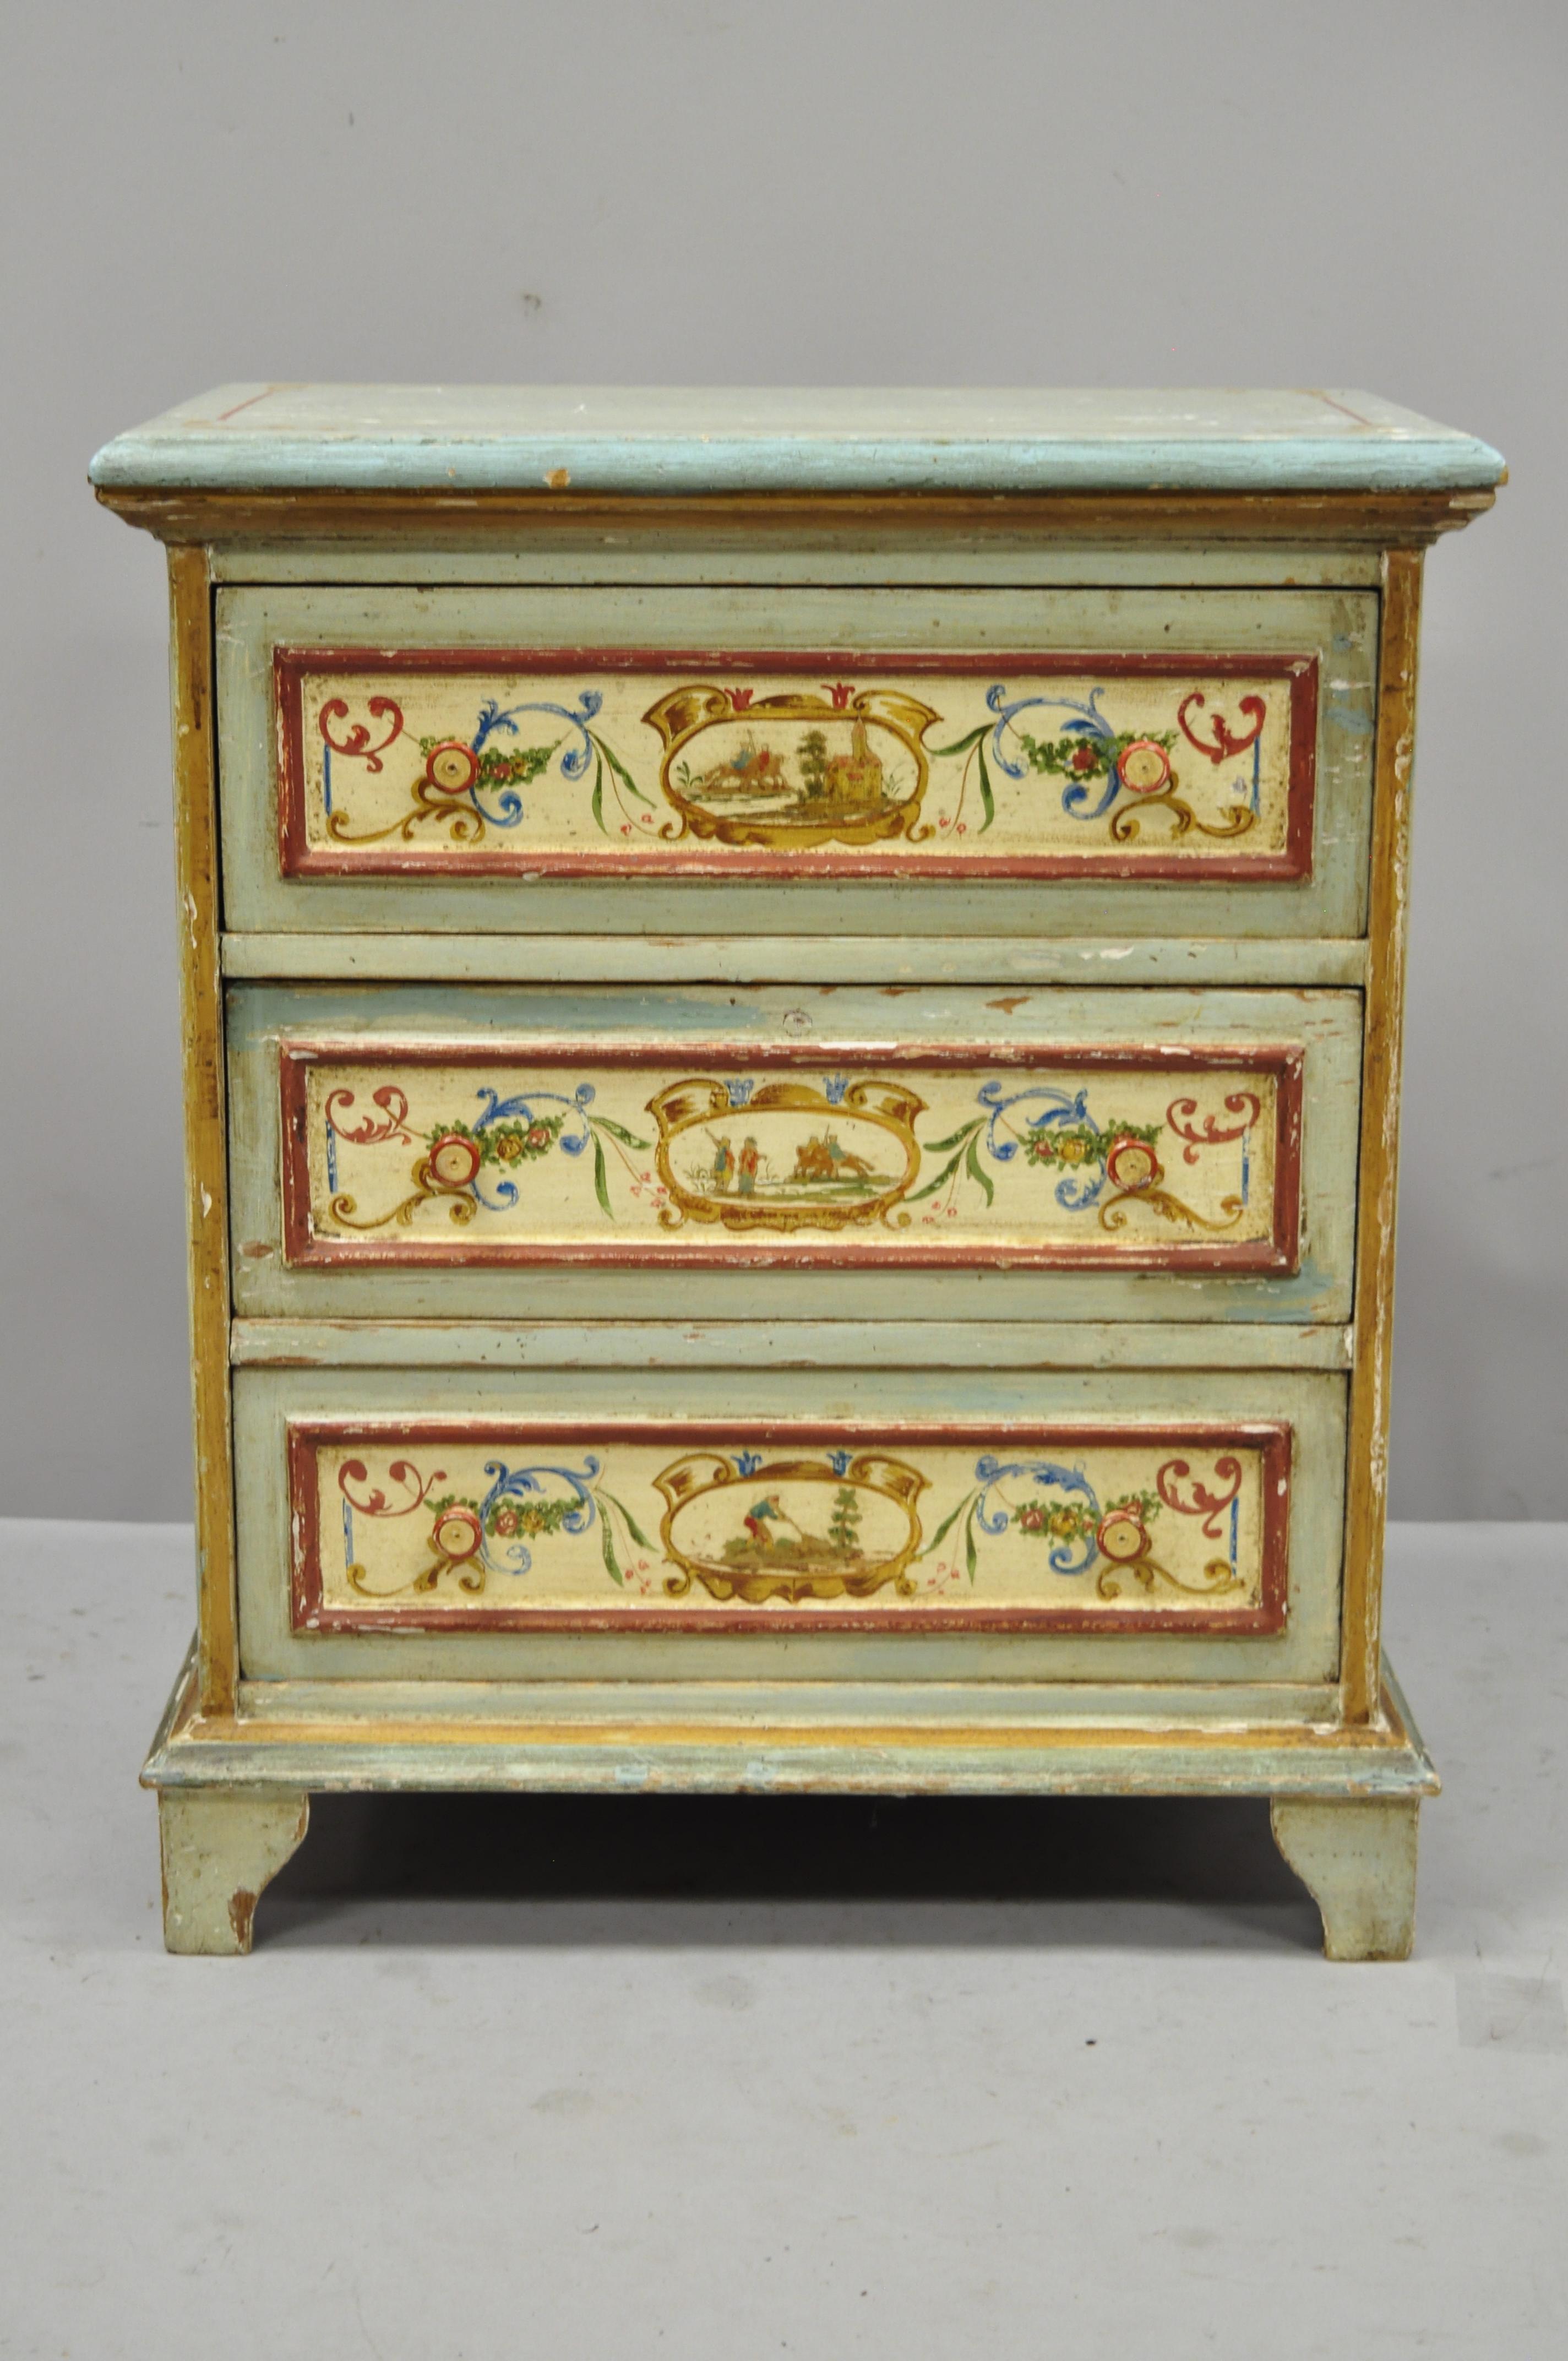 Small antique Italian Venetian blue hand painted 3-drawer commode chest of drawers. Item features hand painted details, blue, red, and gold distress painted finish, solid wood construction, very nice antique item, circa early 20th century.